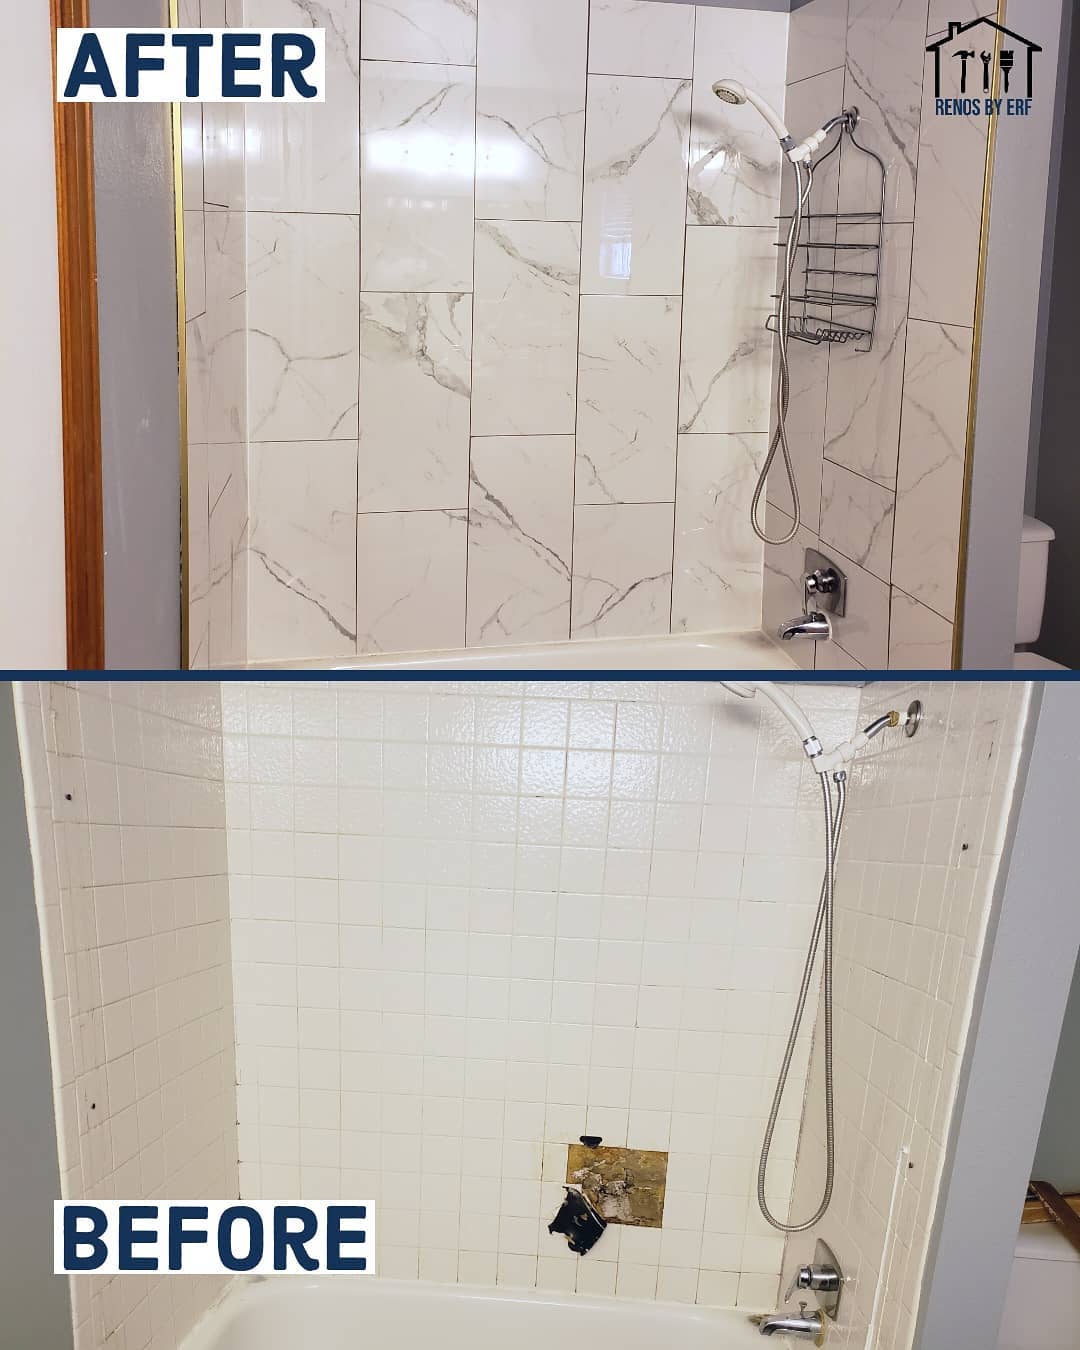 When a client wanted a broken soap dish replaced, but I found mold and rot behind the tile, I re-tiled the tub/shower combo.